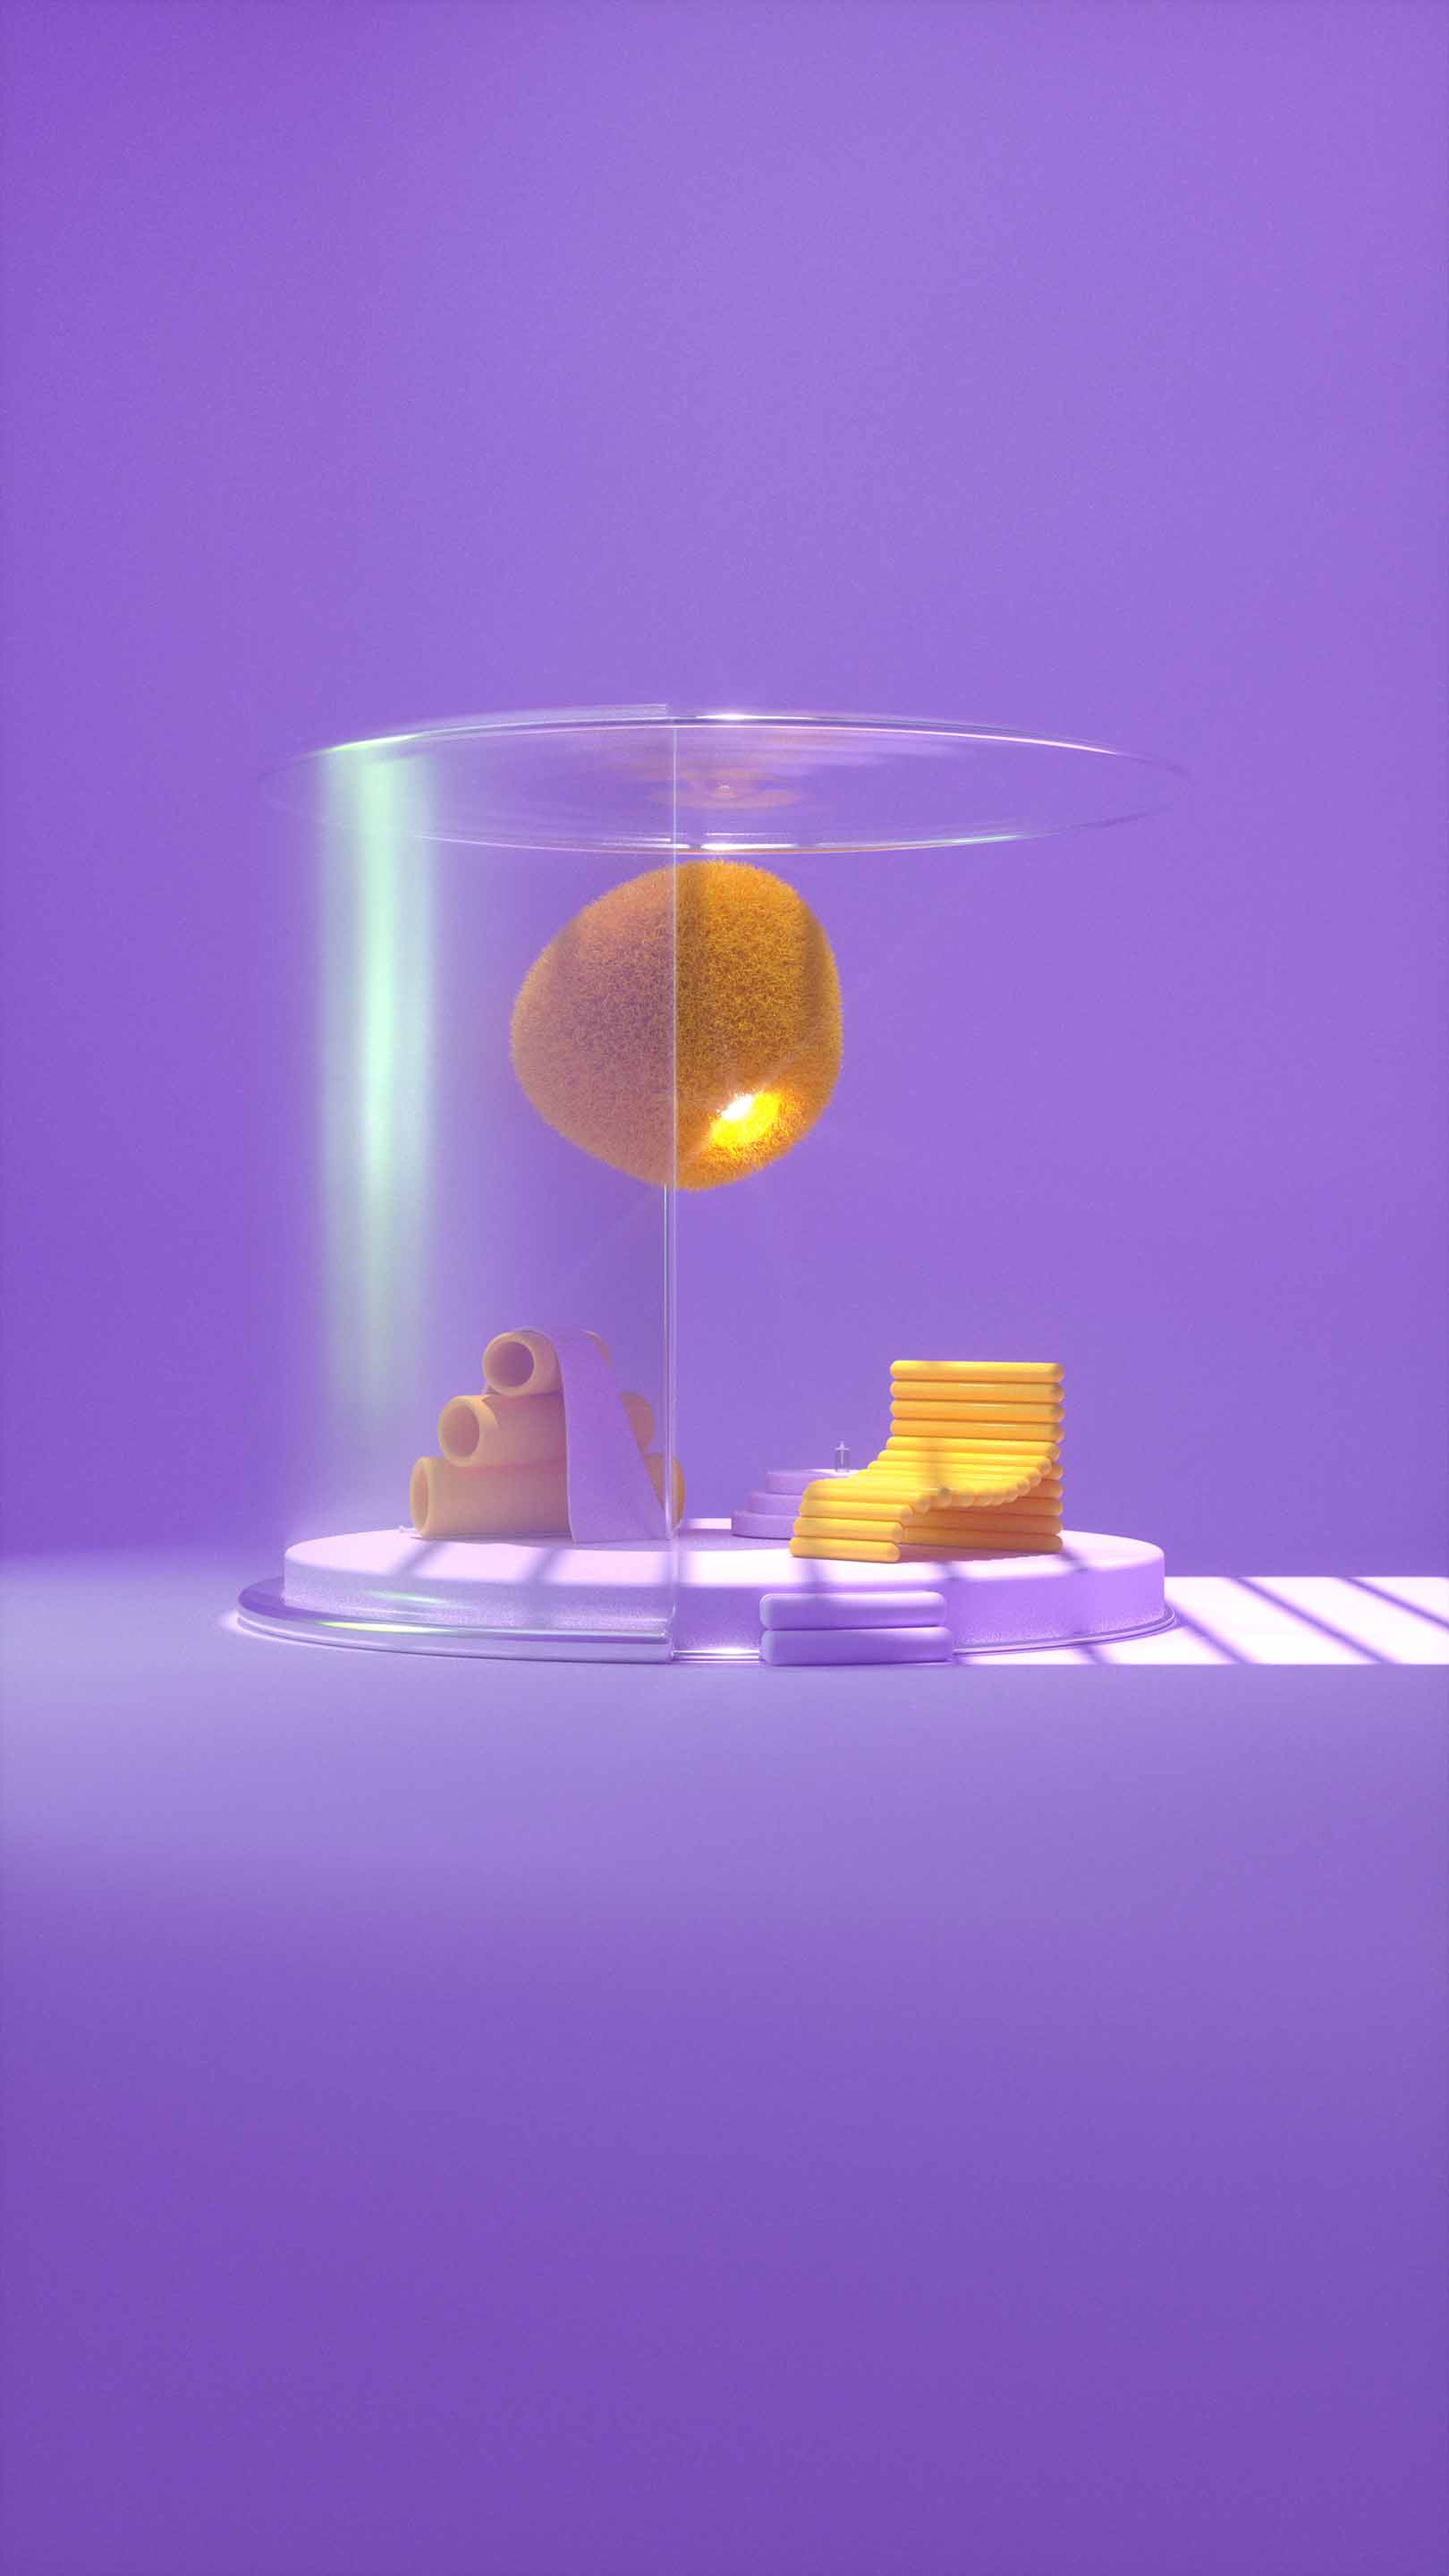 Personal violet space themed render with fuzzy reading lamp and squishy chiar.